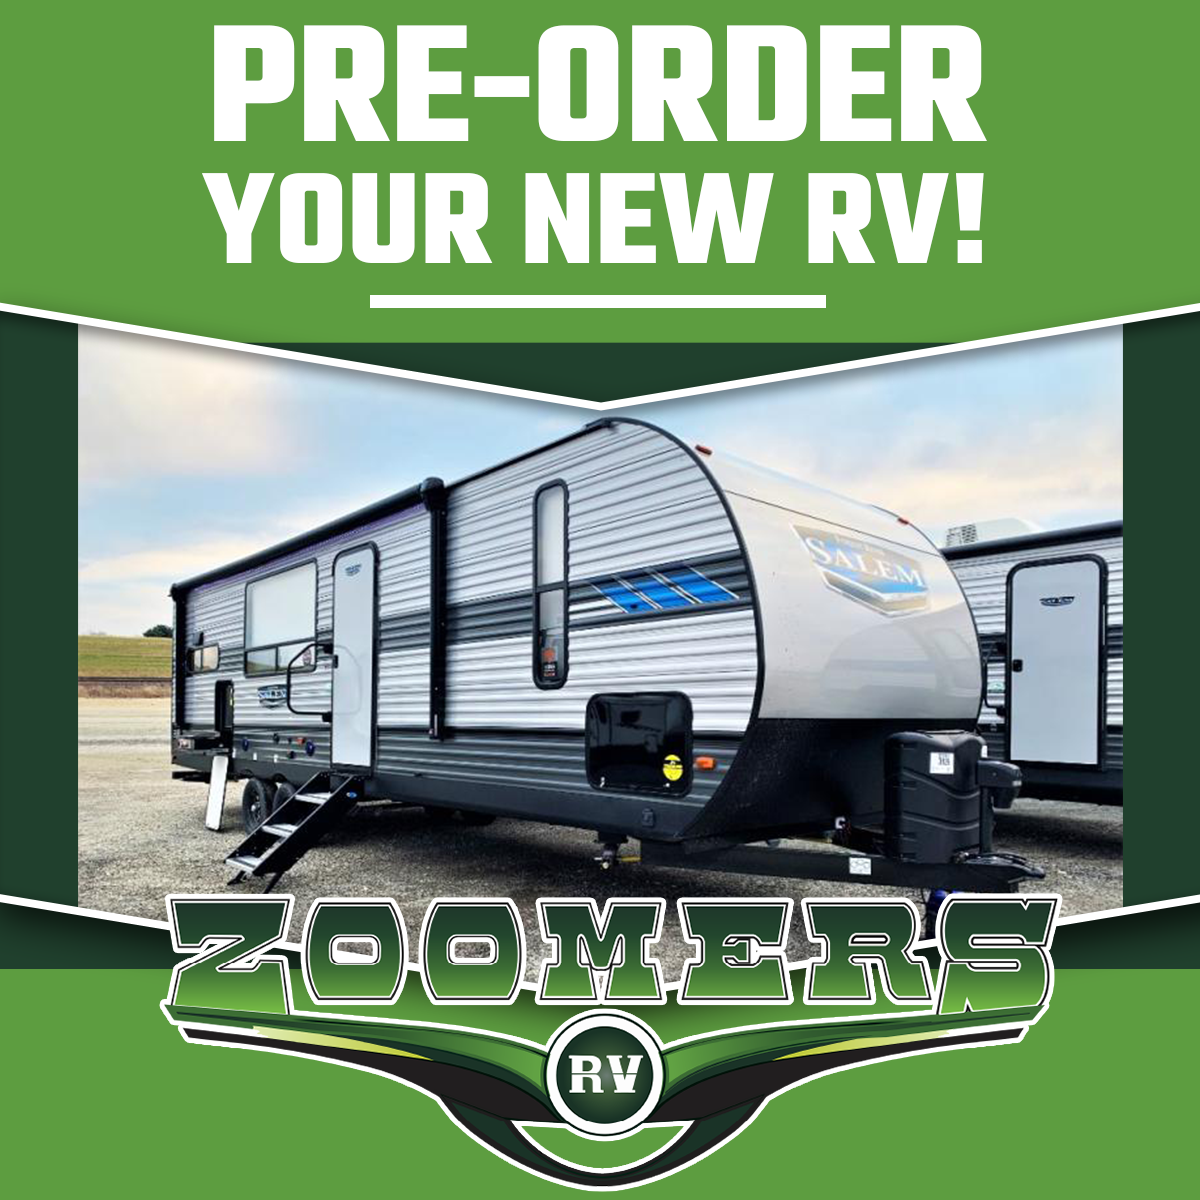 Pre-Order Your New RV With Zoomers!